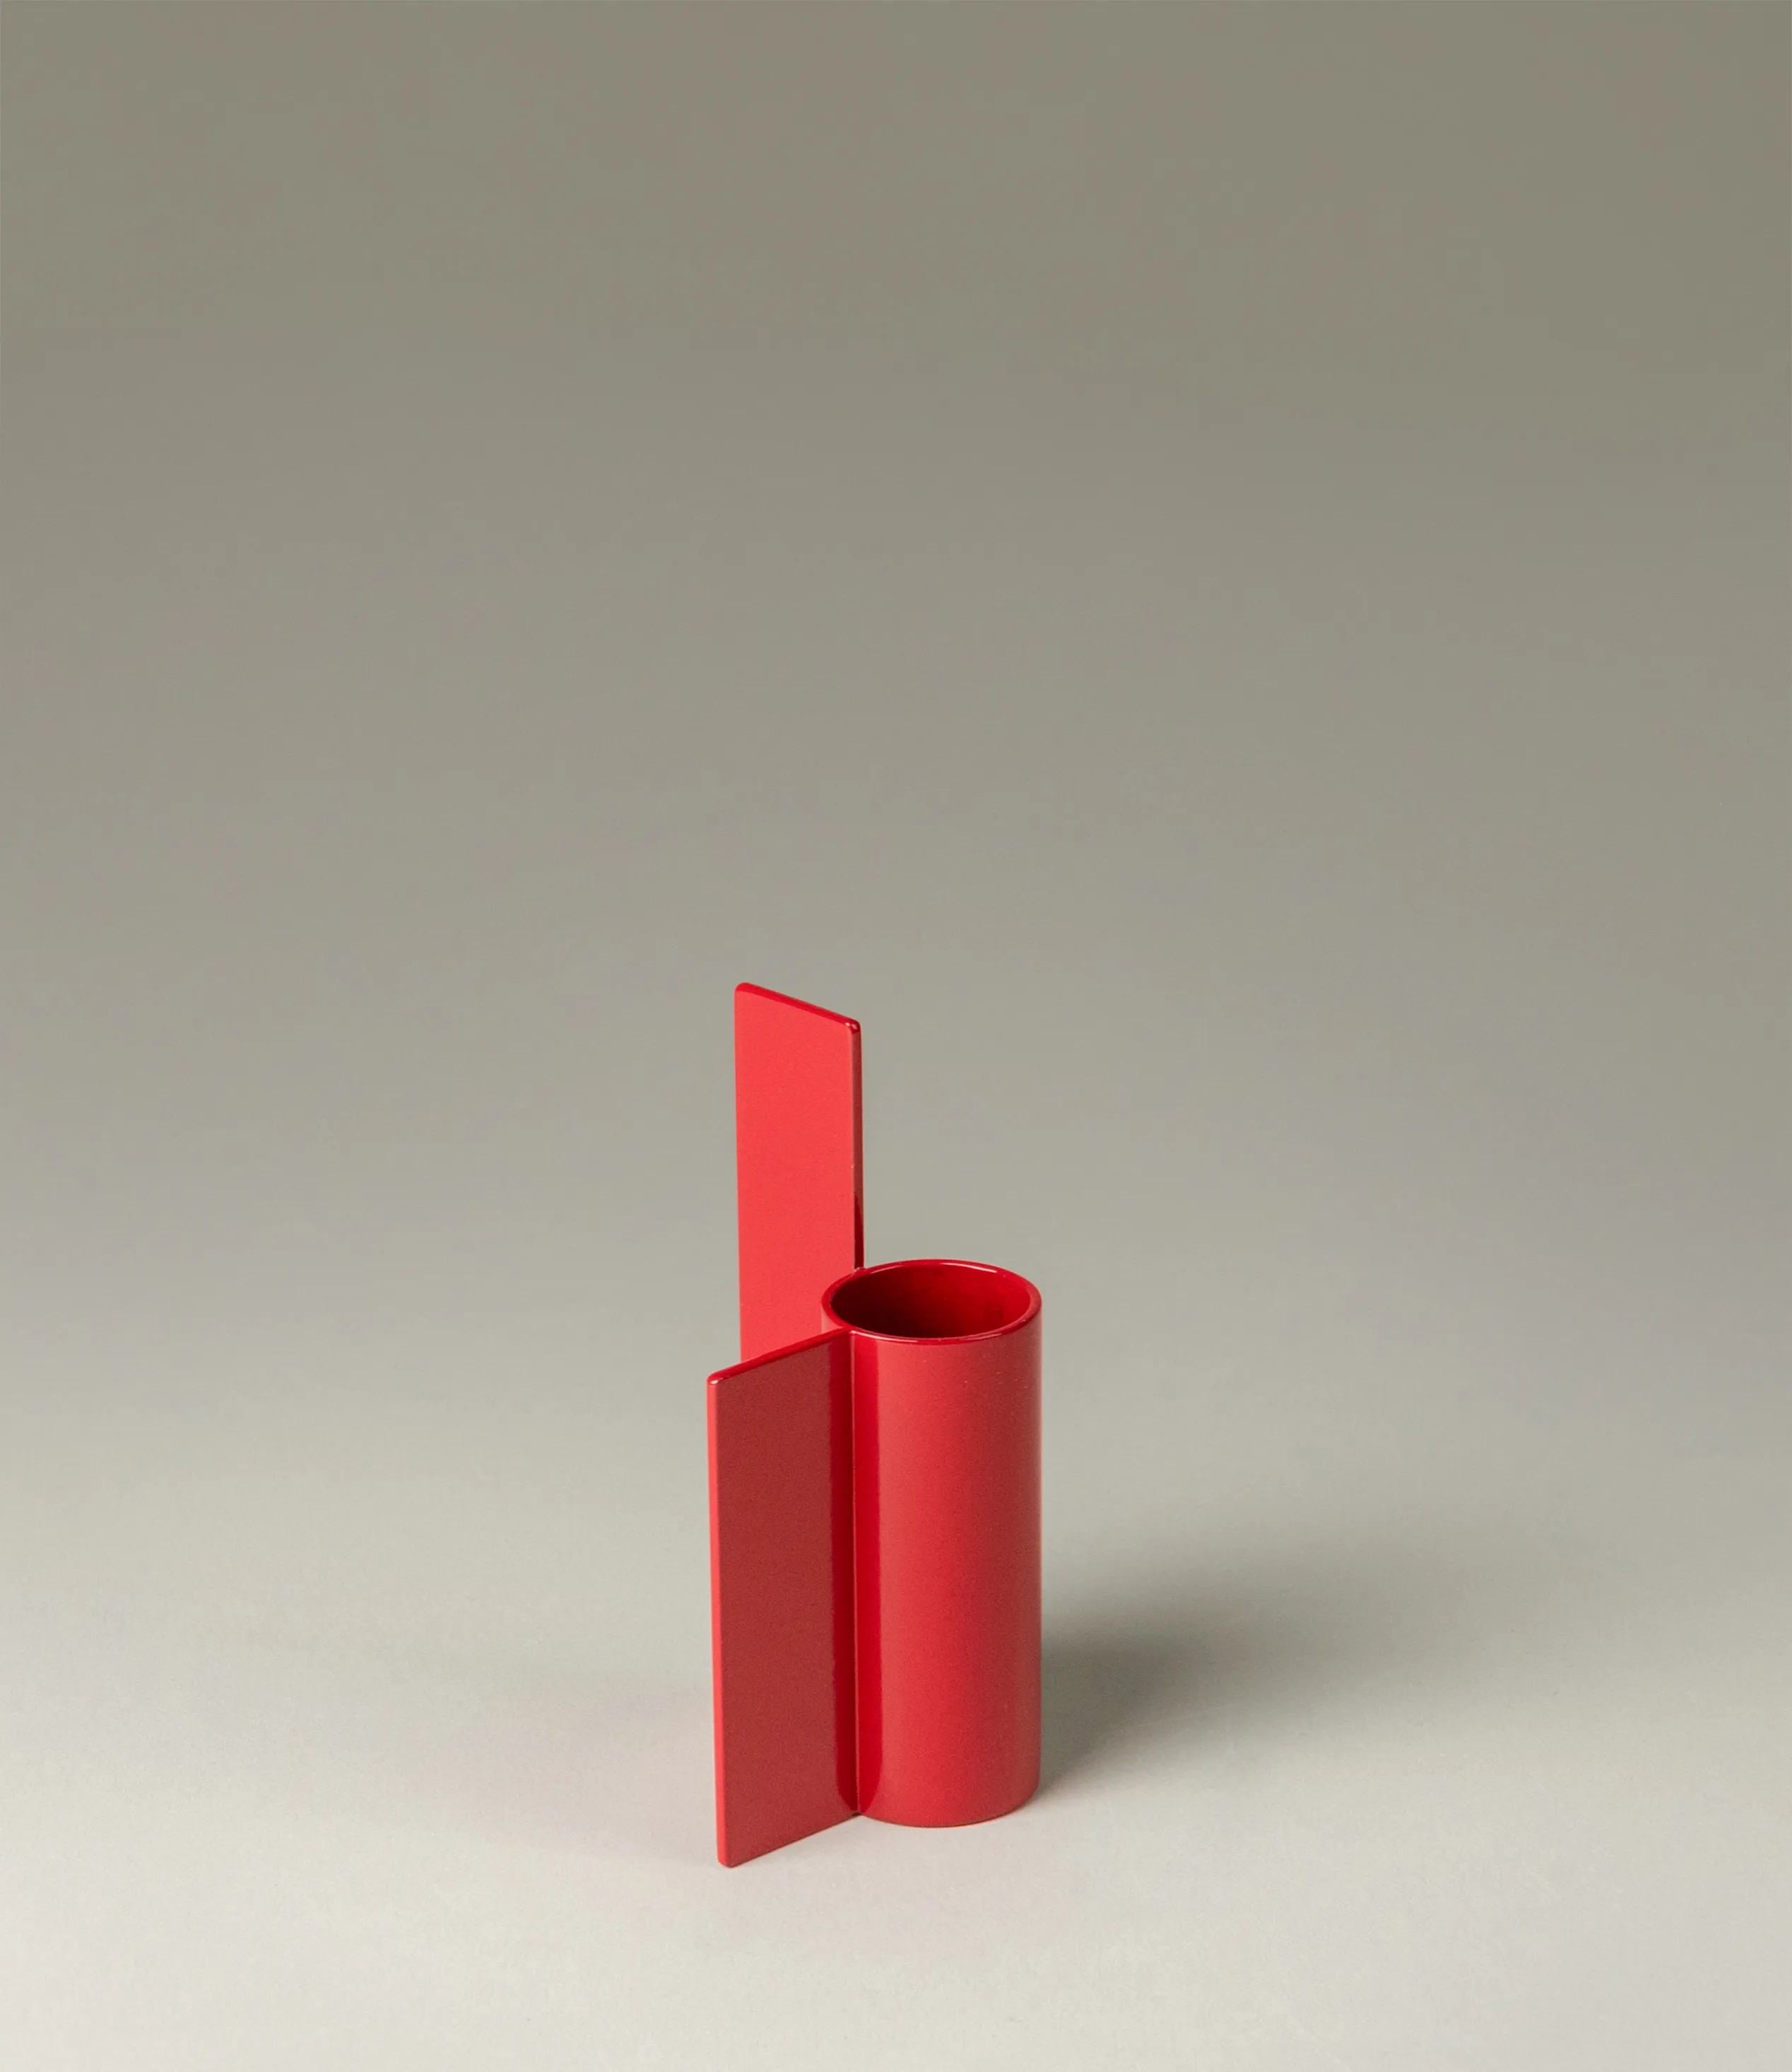 Icon Iysestage 03 from Stences is a candleholder made for taper candles. This picture shows the red variant of this item. The steel material has a glossy surface which emphasize the soft geometric shapes of the product in question.